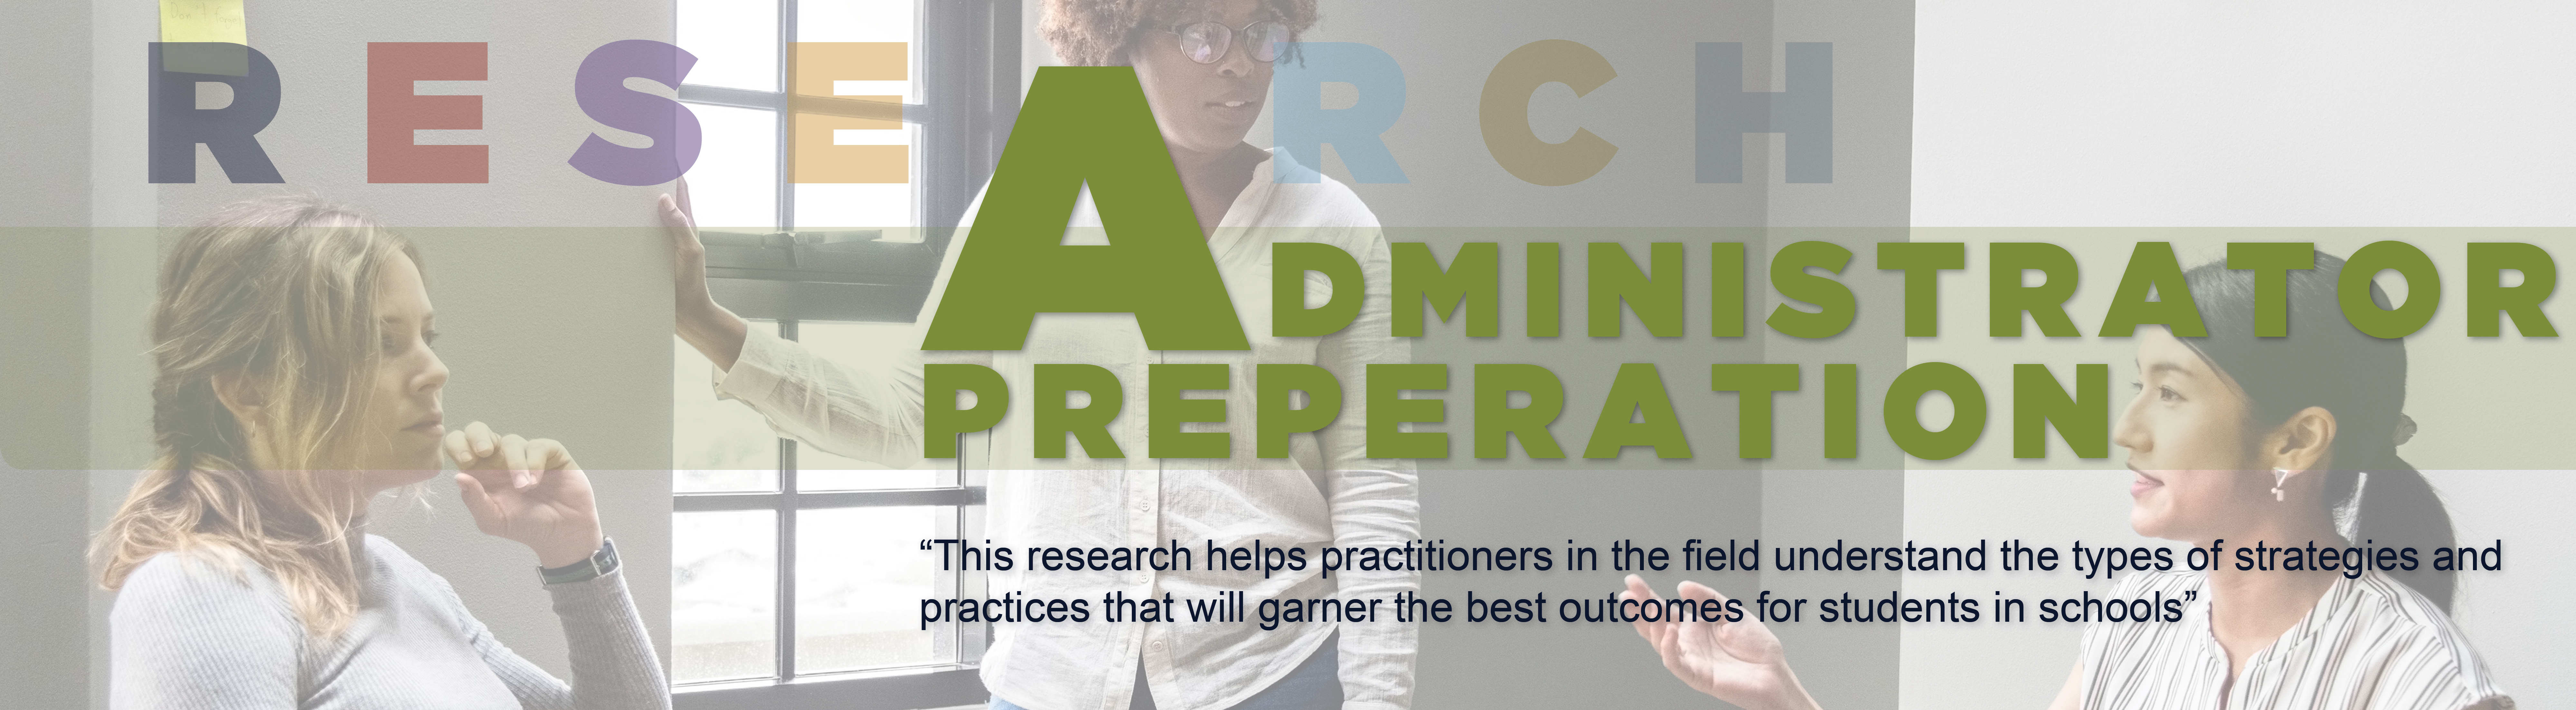 Administrator preparation programs.  "This research helps practitioners in the field understand the types of strategies and practices that will garner the best outcomes for students in schools" - Quote by Jen Michno and Jennie Weiner